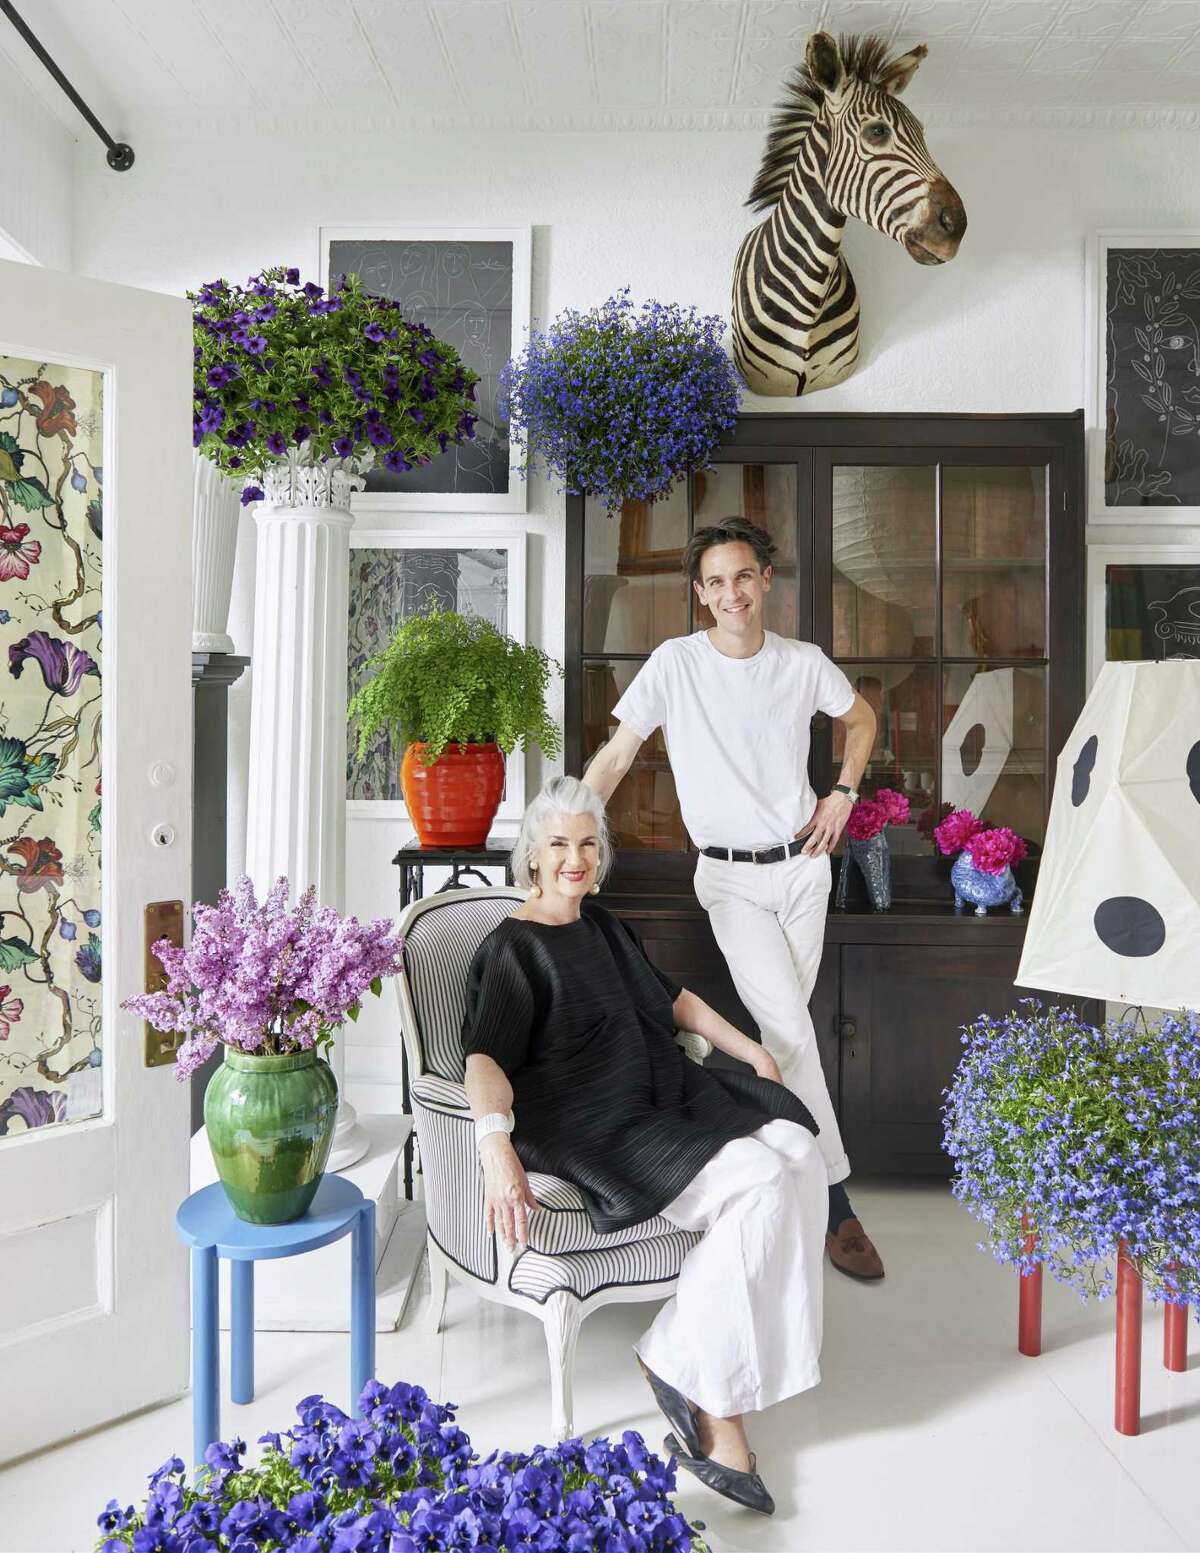 Having garnered the attention of the design world in just a half-dozen years, New York City-based Patrick Mele recently opened a design and decor shop in his hometown of Greenwich, which, like his firm, bears his name. He poses in the store with his mother, Patricia, who tends to shop business when Mele is working off-site on projects.